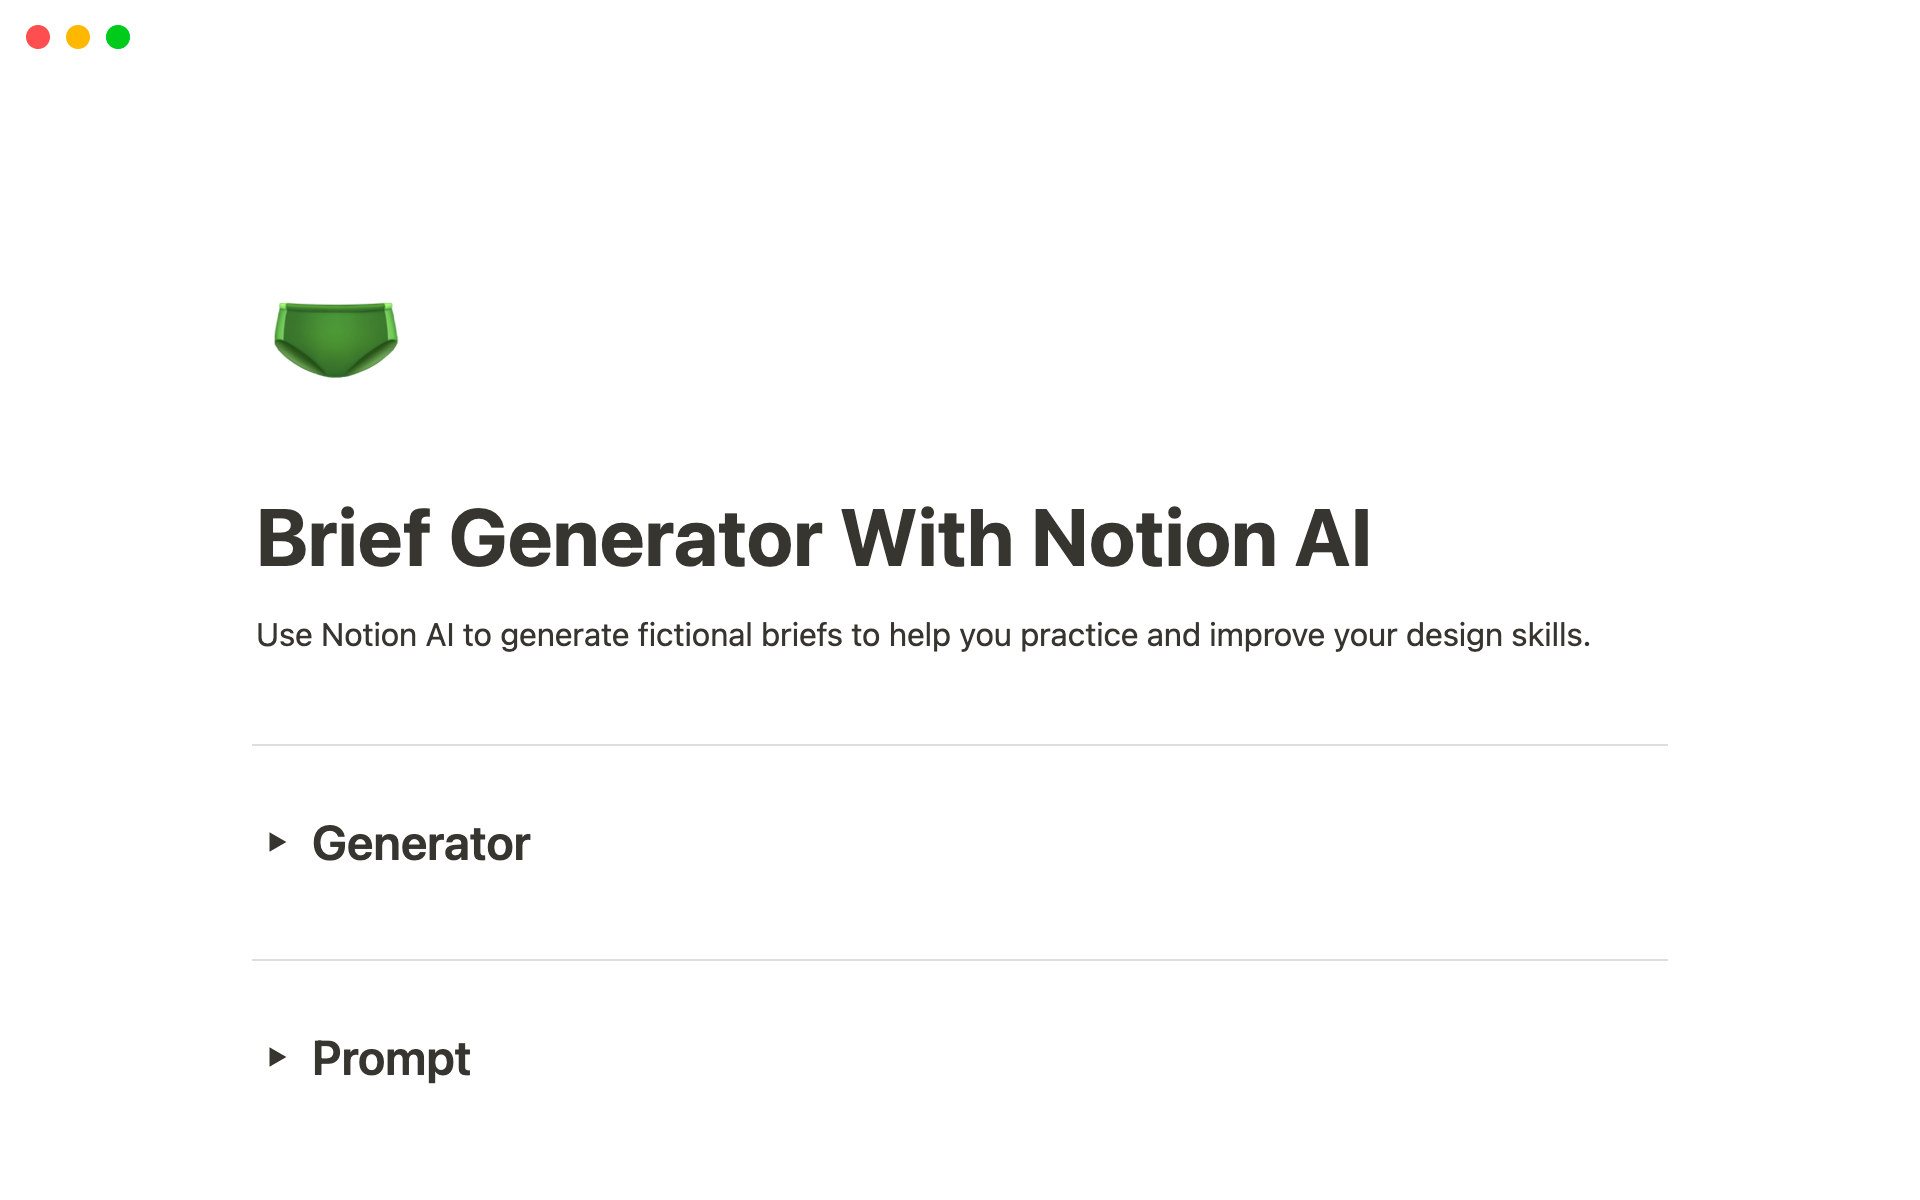 Brief generator with Notion AI